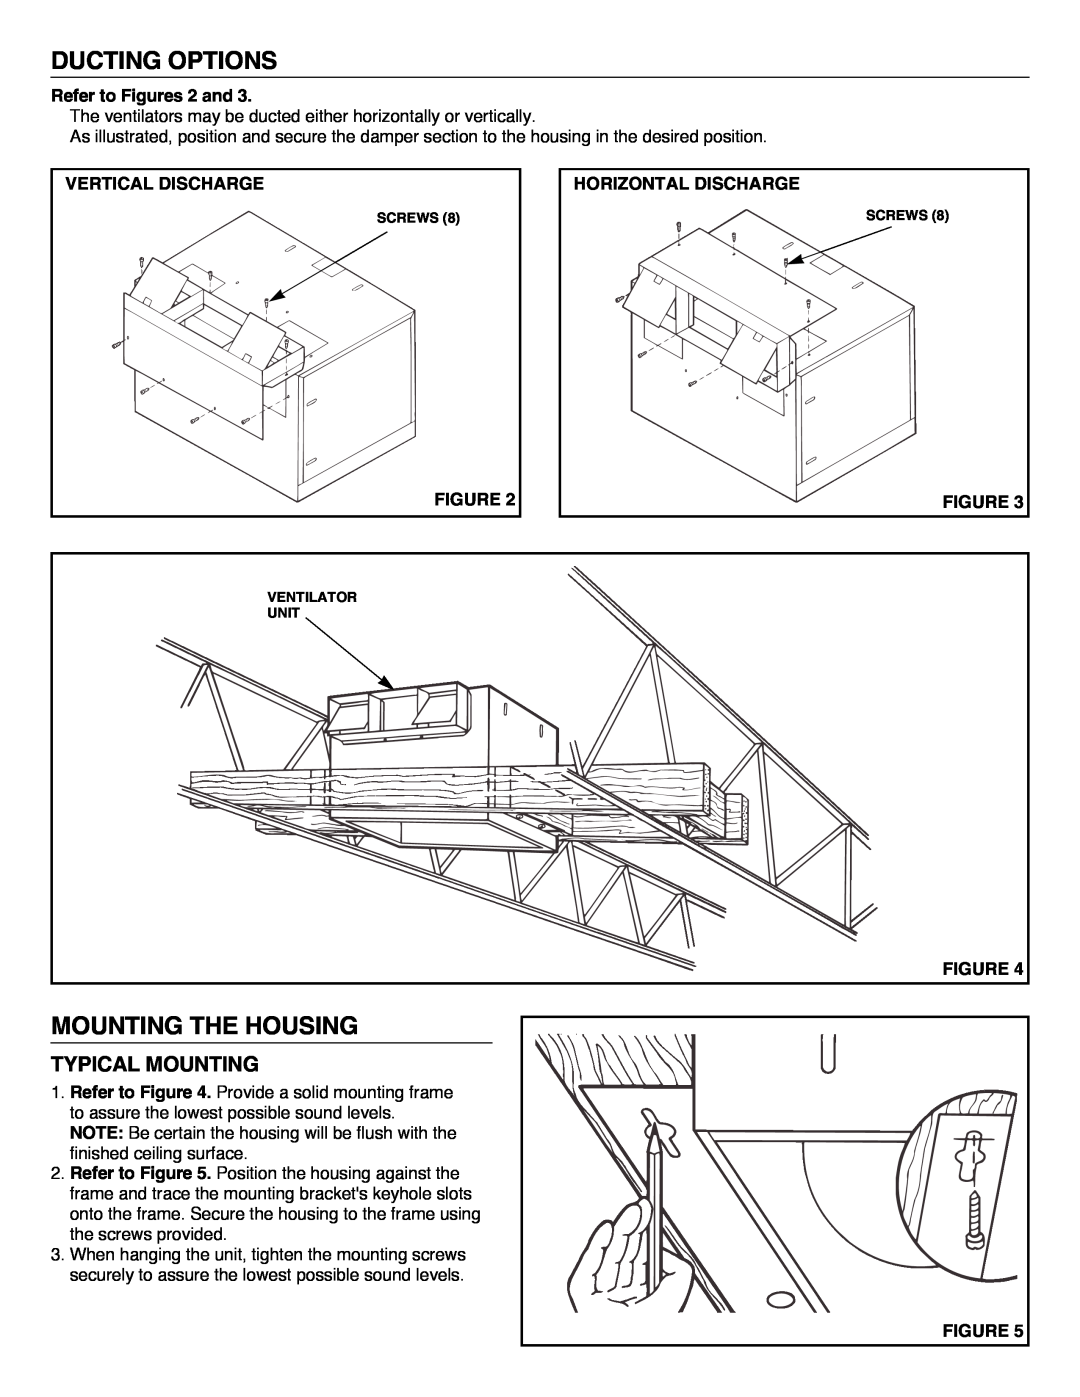 NuTone QT700, QT1000 installation instructions Ducting Options, Mounting The Housing, Typical Mounting 